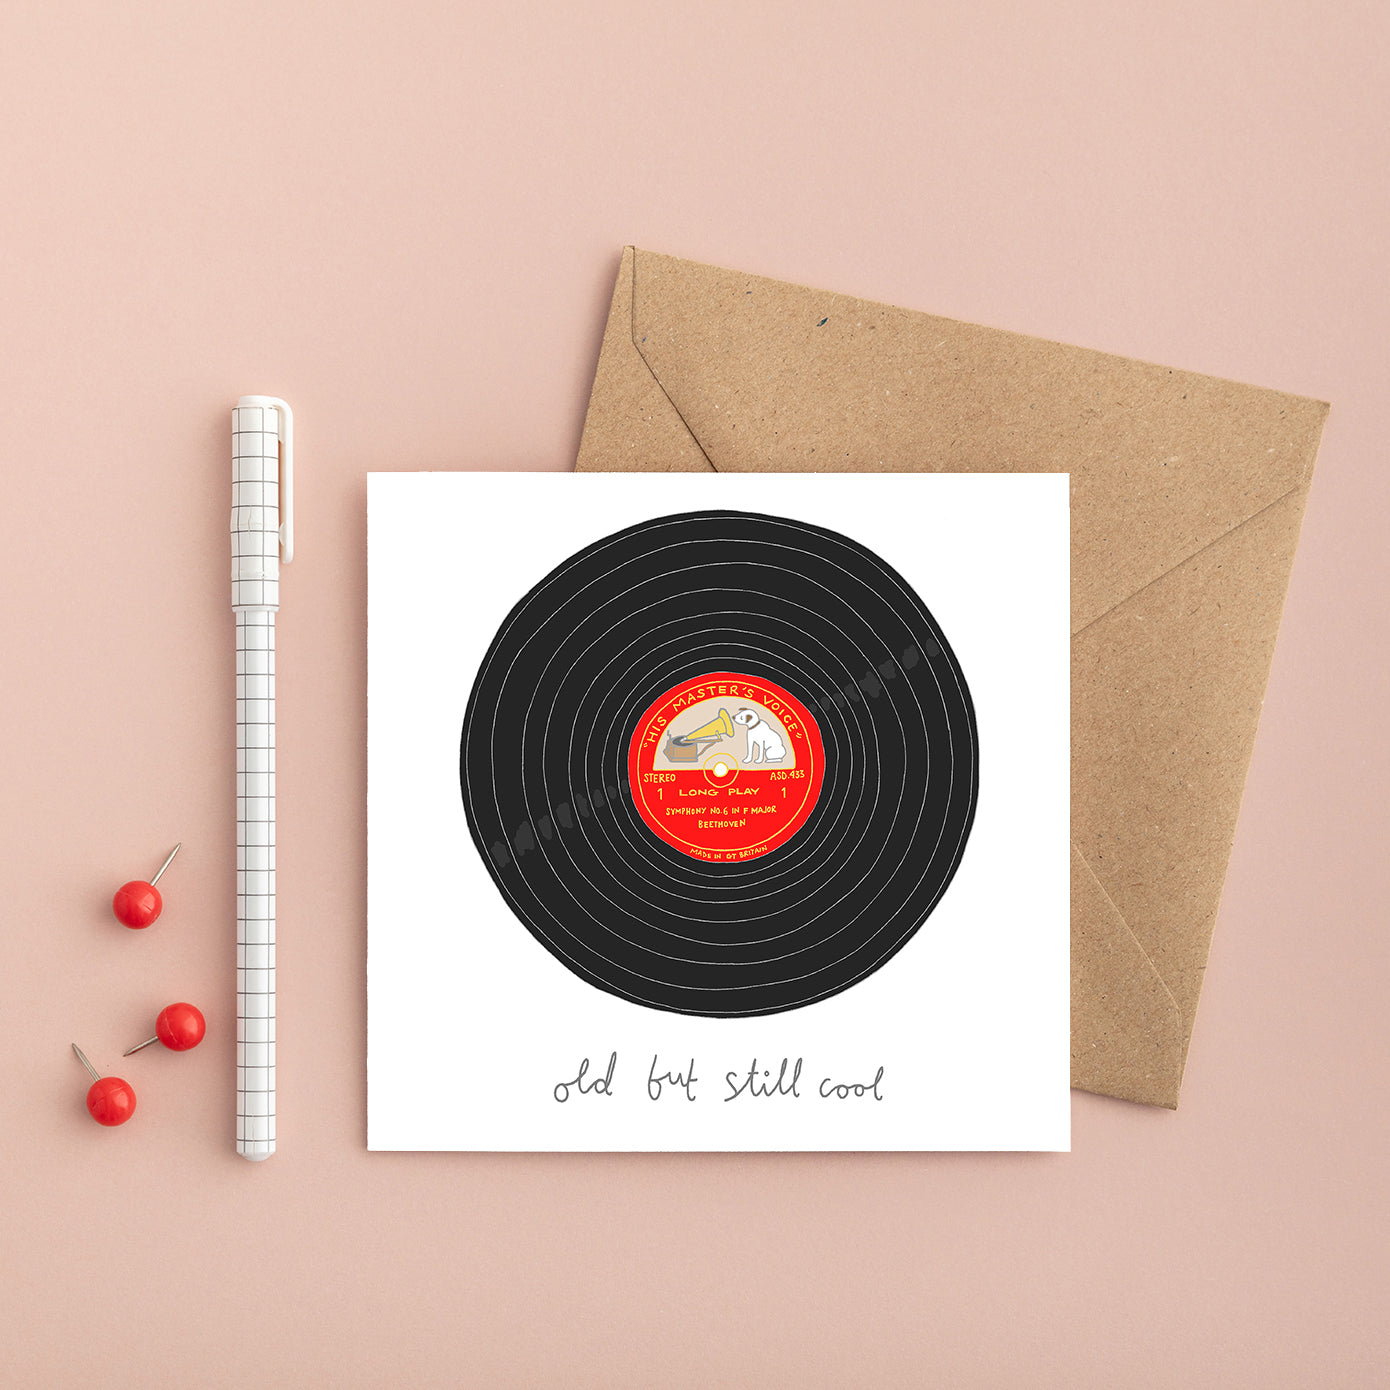 A retro birthday card with an illustration of a record